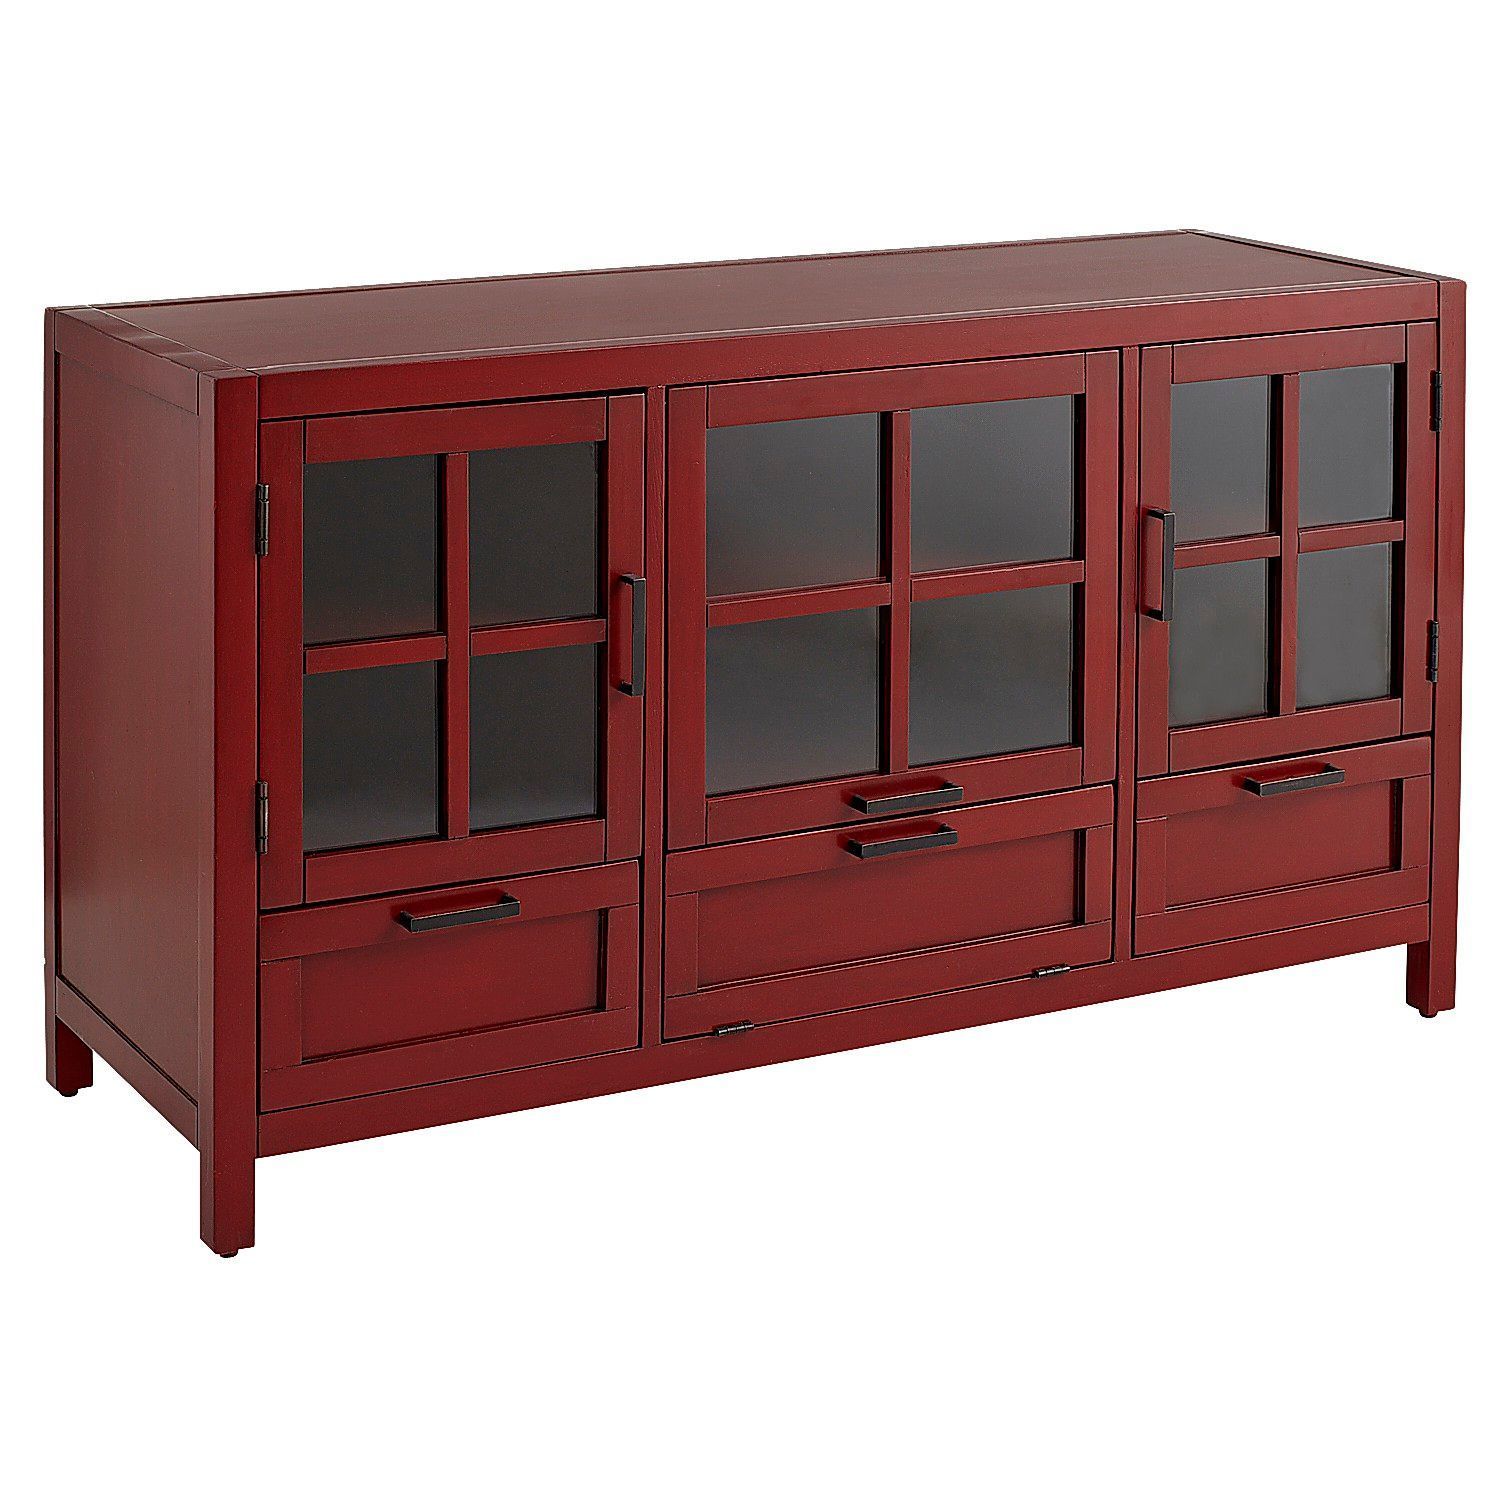 Sausalito Antique Red Modular 52" Tv Stand | Basement Pertaining To Modular Tv Stands Furniture (View 9 of 15)